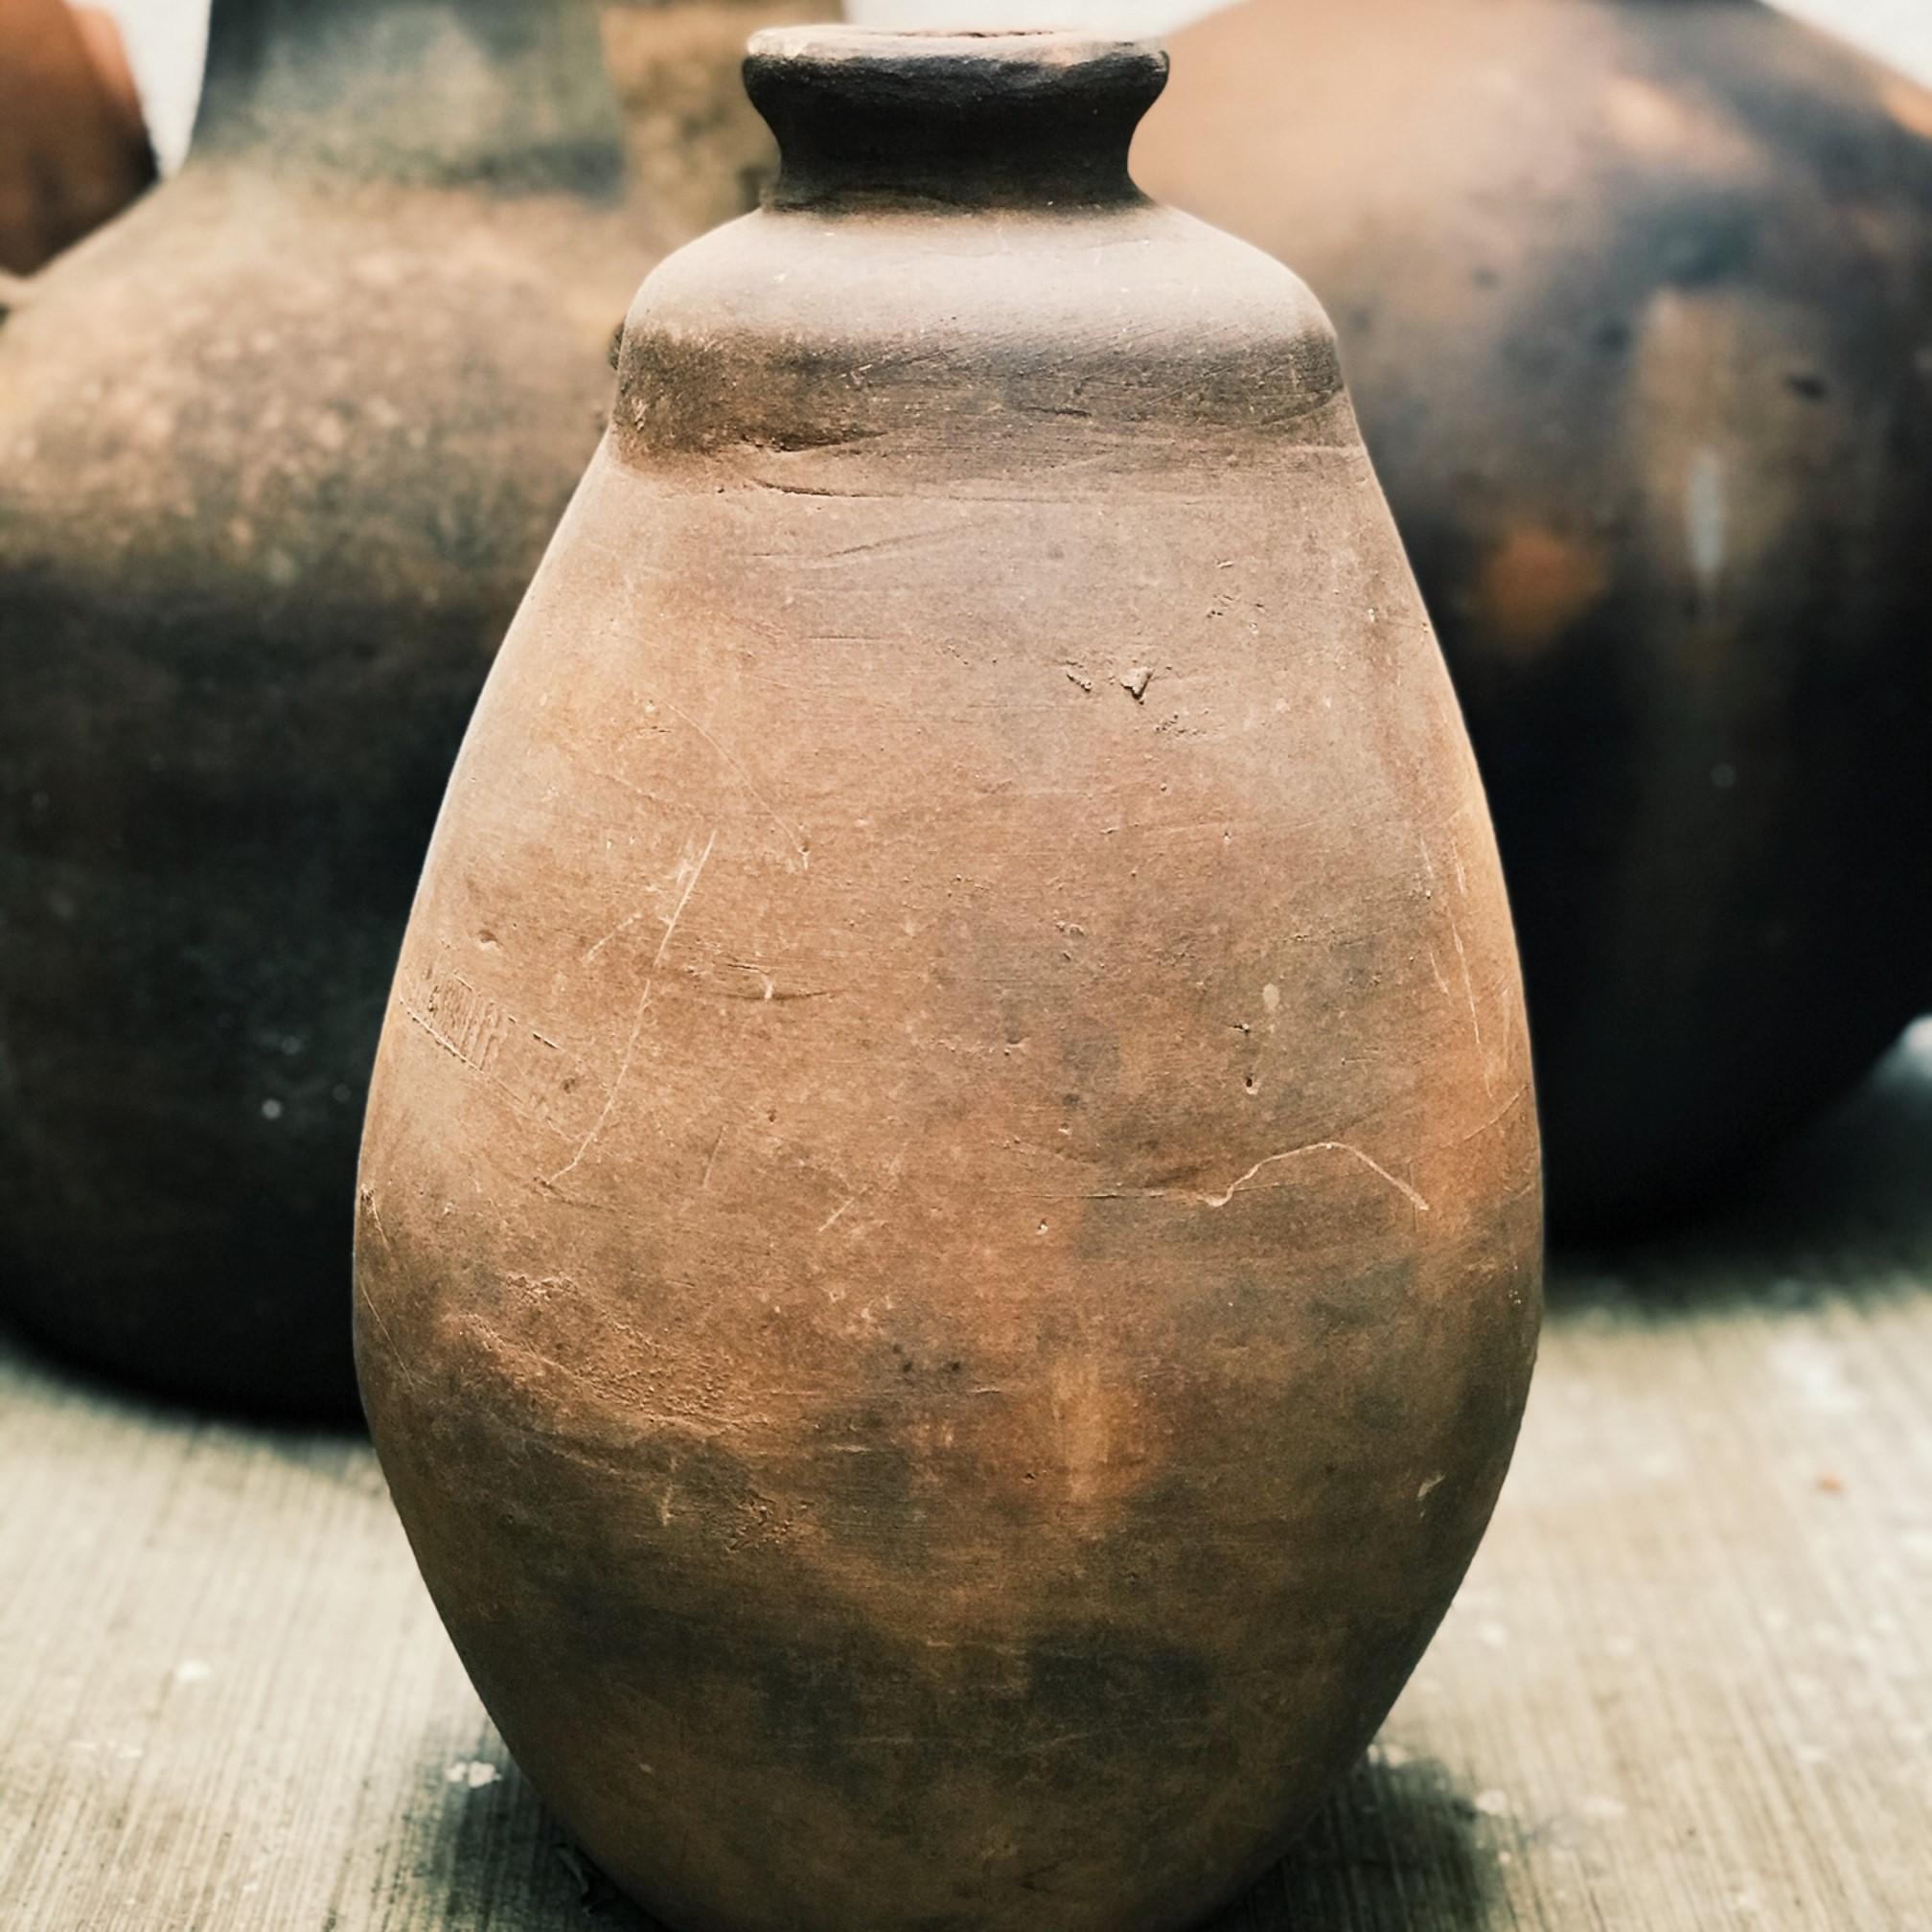 Beatriz is a sensuous, slightly irregular shape terra-cotta vessel with earthy, handmade appeal.

Discovered at an abandoned potters studio in the Jalisco region of Mexico.

Beatriz
Mexico, 1995
Dimensions: 18